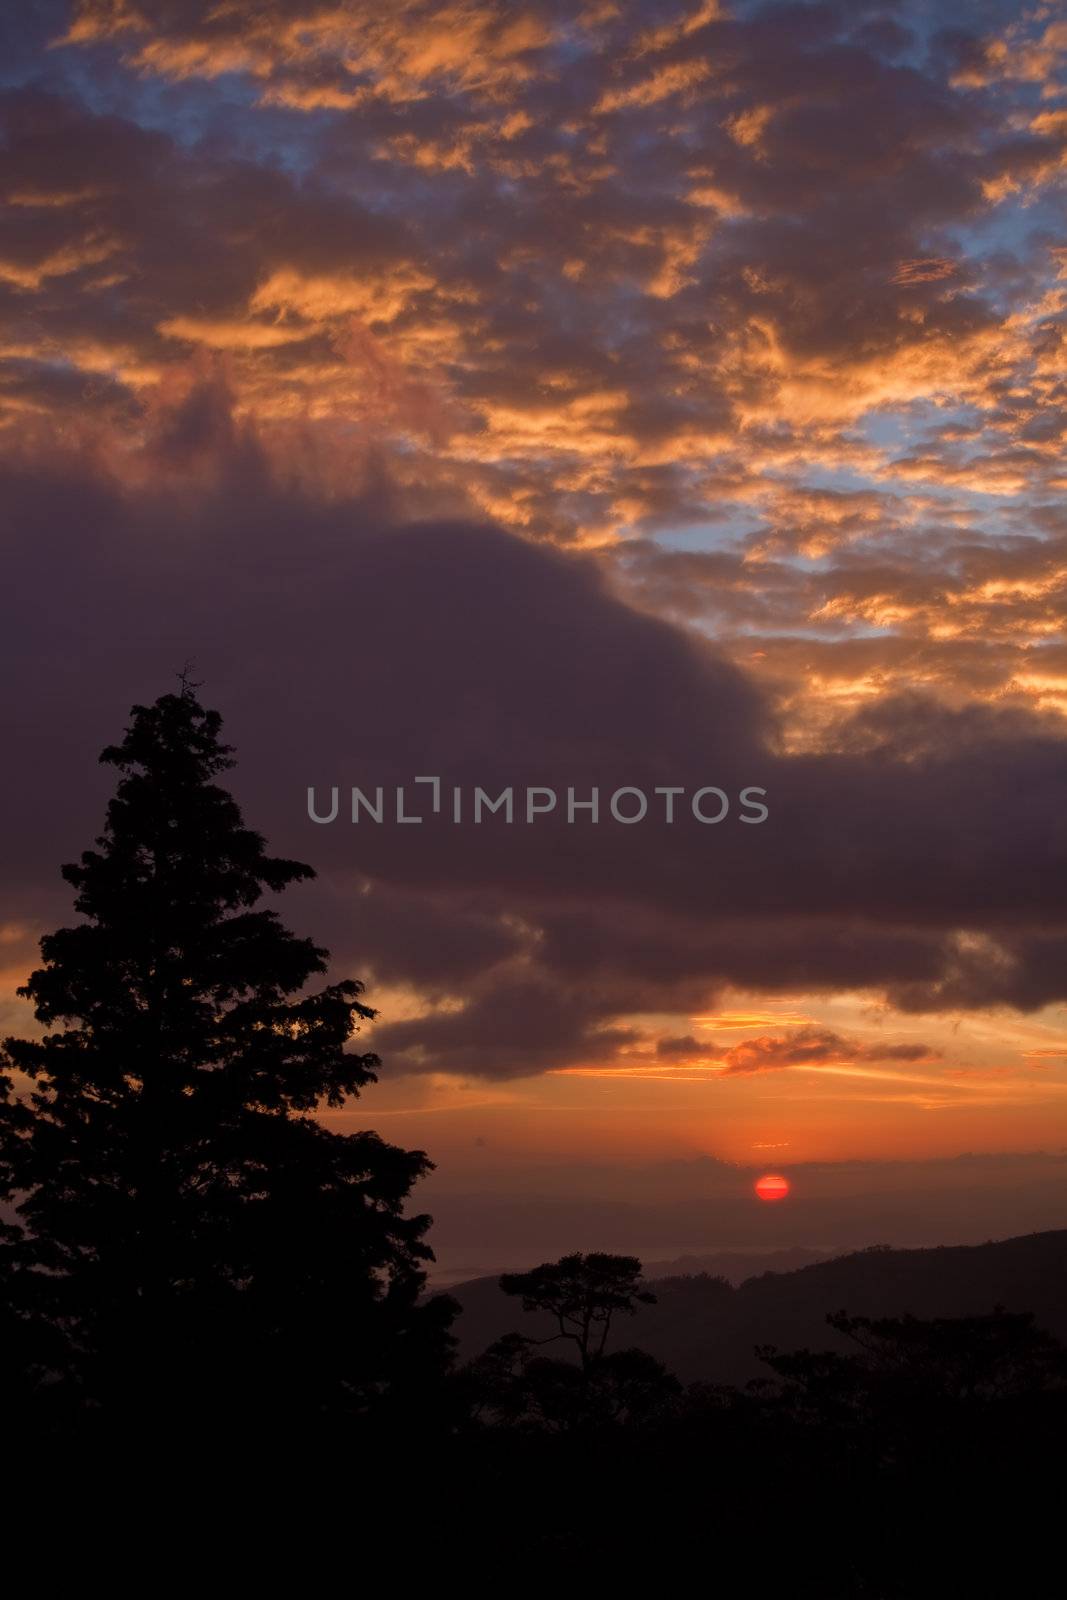 Sunset next to pine tree in a Latin American forest